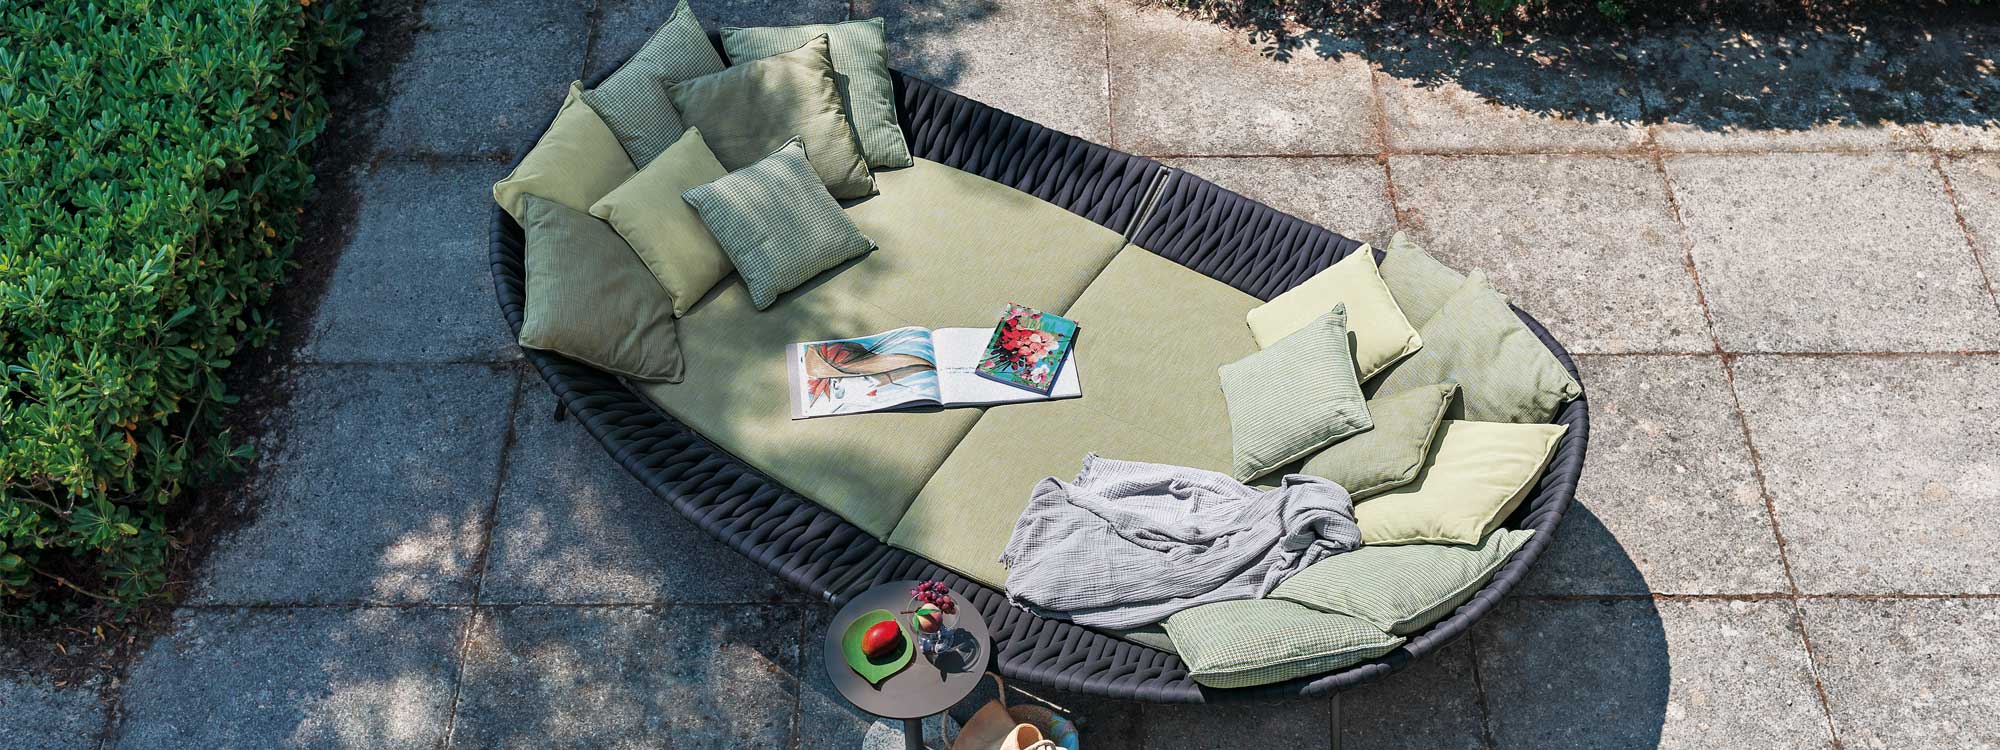 Image of pair of Arena garden daybeds together